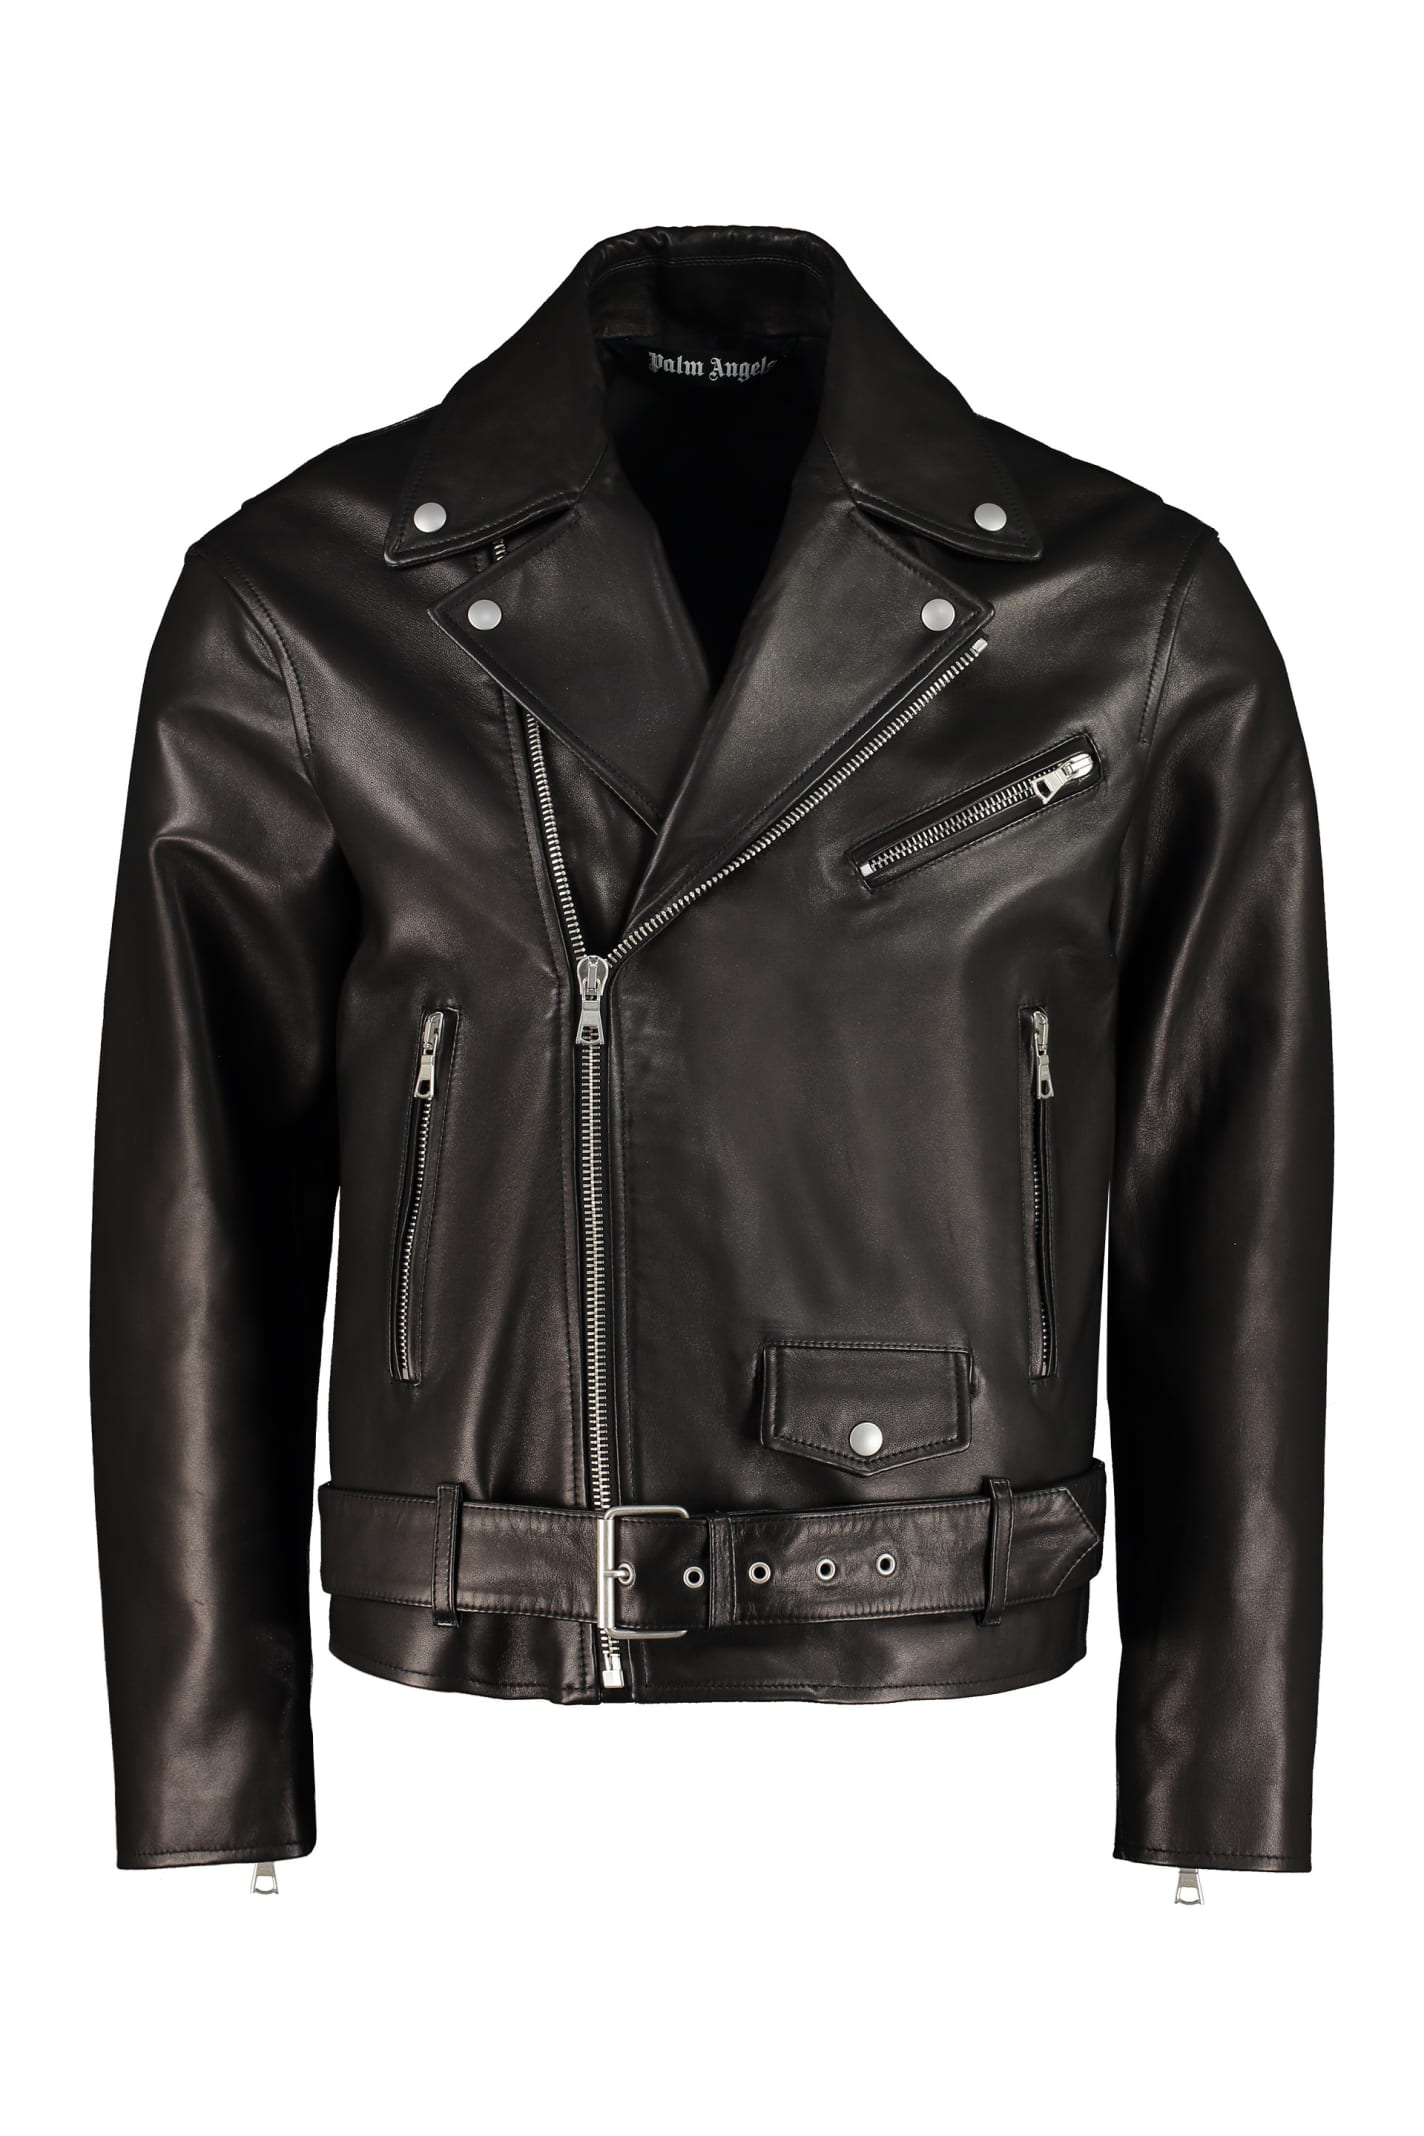 Palm Angels Belted Leather Jacket